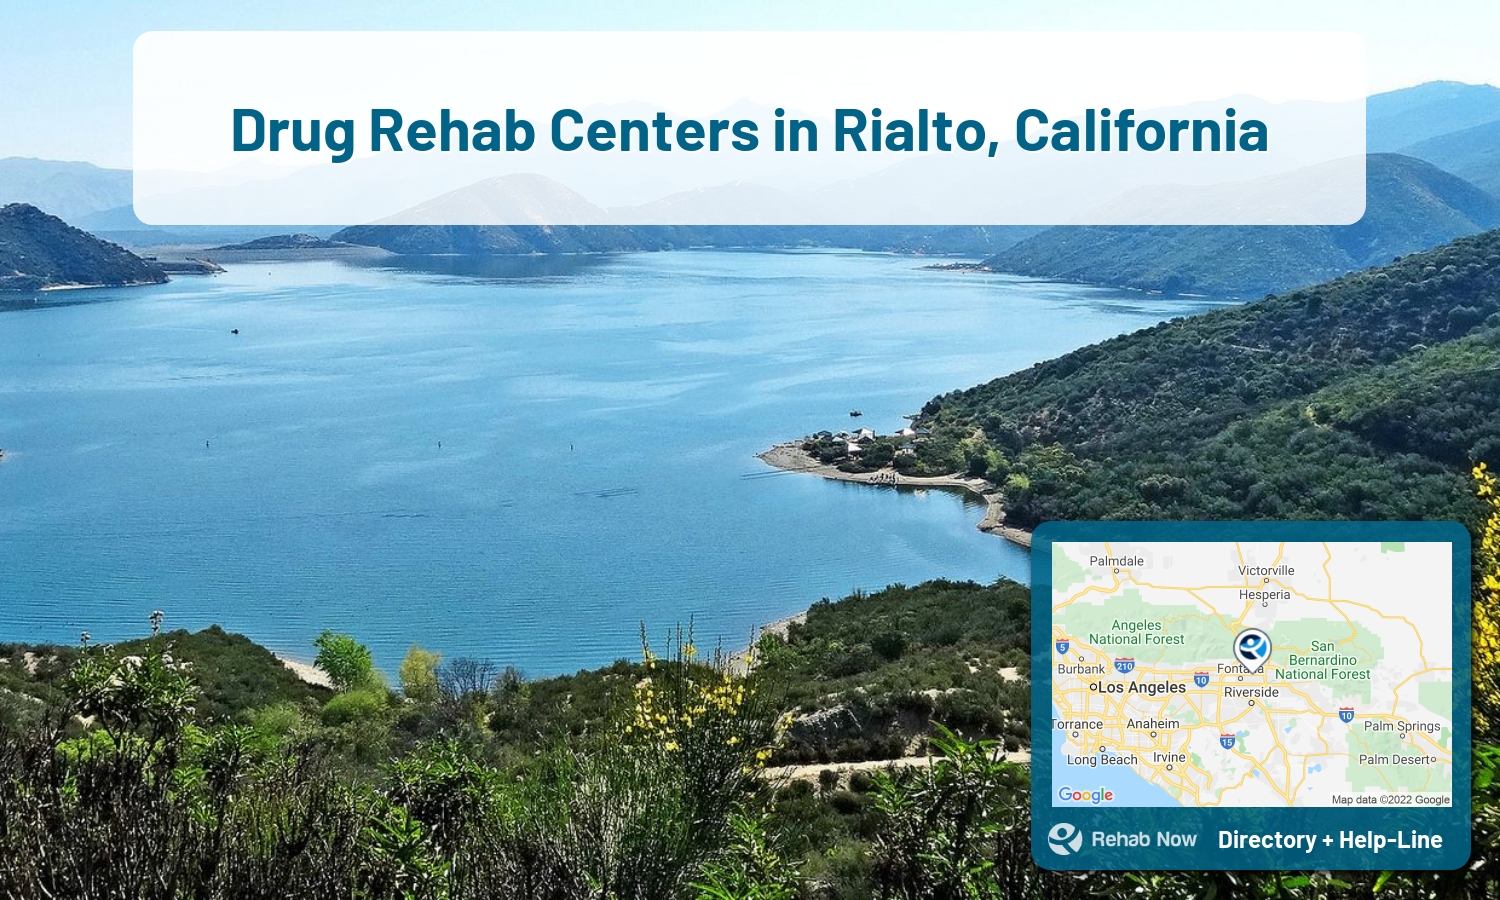 Let our expert counselors help find the best addiction treatment in Rialto, California now with a free call to our hotline.